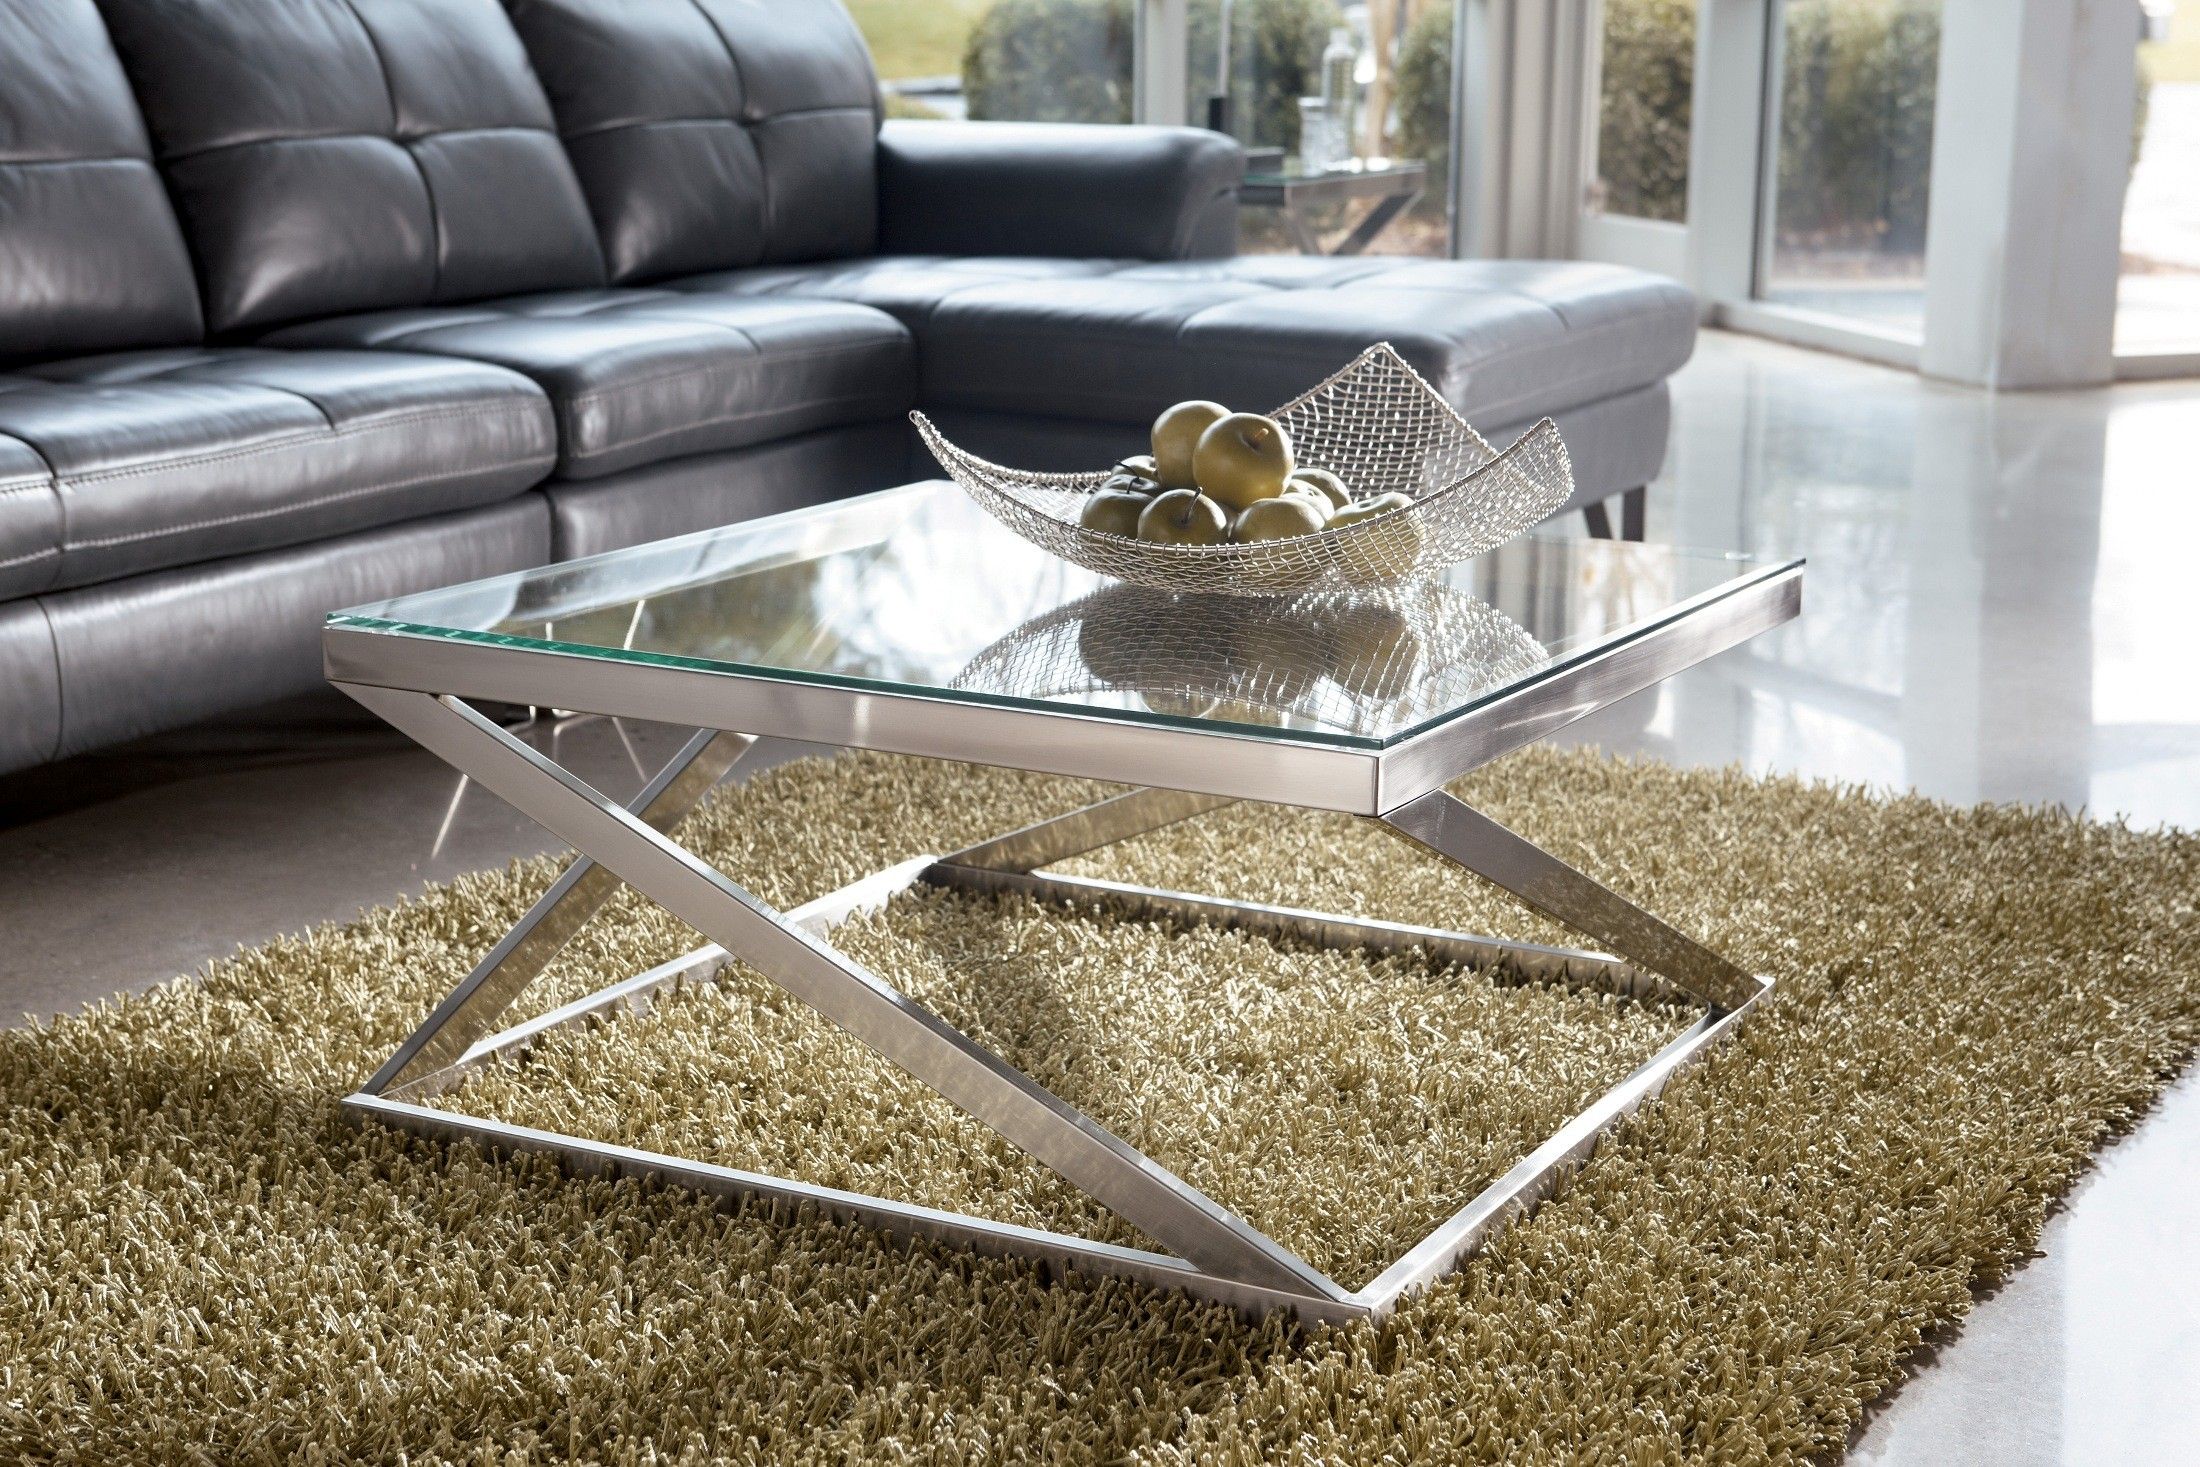 Coylin Square Cocktail Table From Ashley (t136 8) | Coleman Furniture Within Hassch Modern Square Cocktail Tables (Gallery 4 of 20)